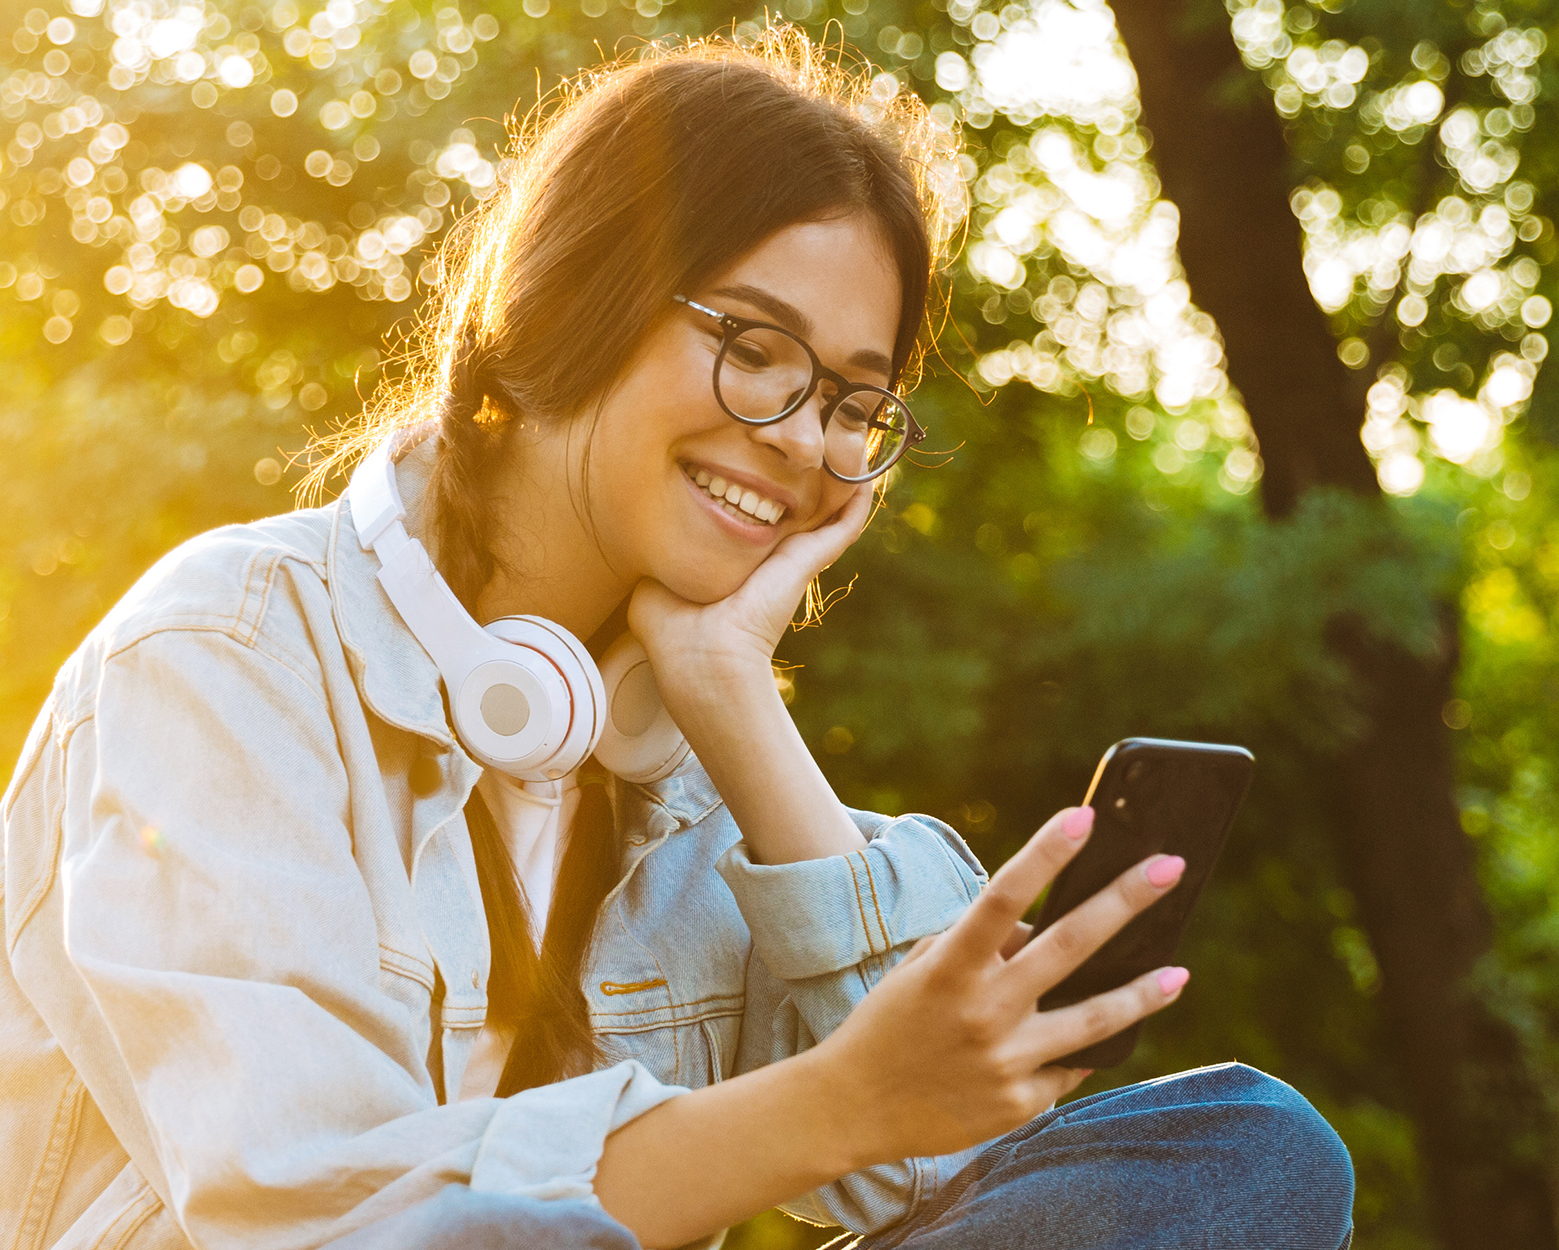 "A girl with glasses and headphones on her neck smiles as she looks at a smartphone while sitting outside"